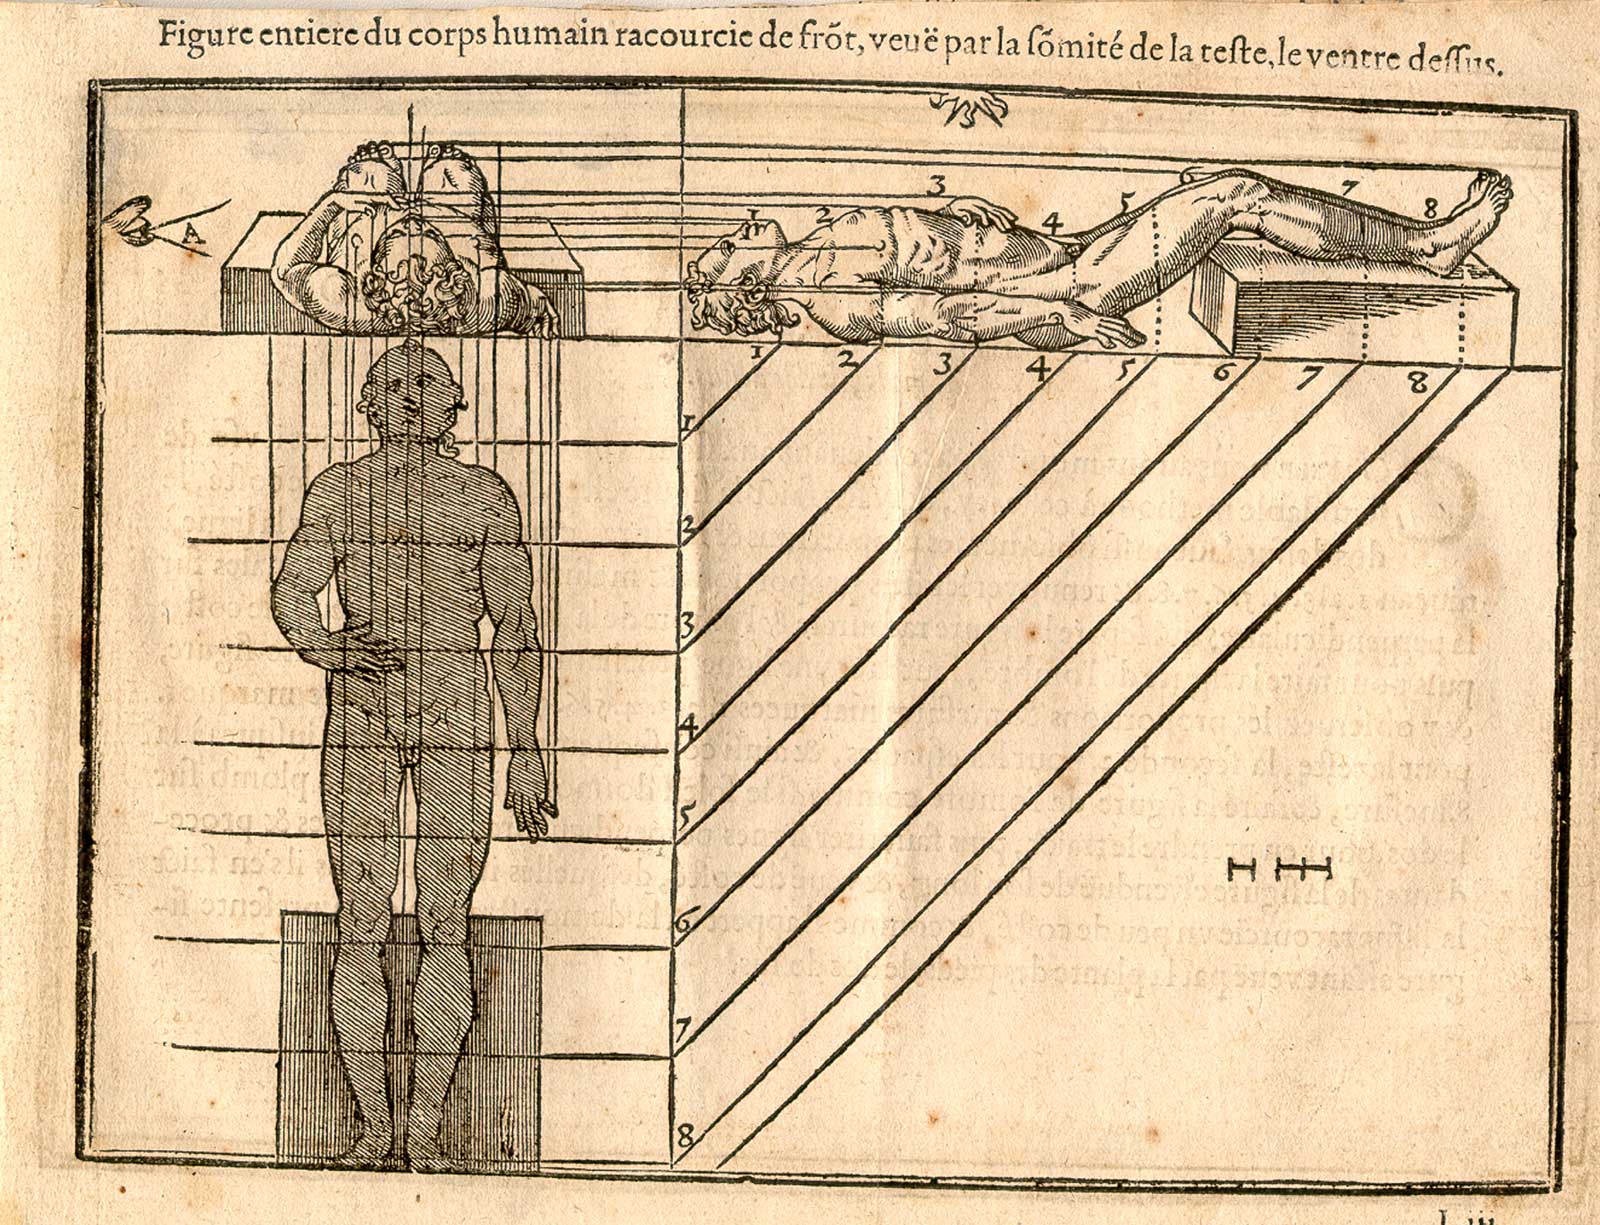 Woodcut illustration of two nude male anatomical figures lying down on their backs on a flat surface, viewed from the side and from the head, both images in identical poses, both images showing the proportions of the figure measured out, from Jehan Cousin’s Livre de pourtraiture, NLM Call no.: WZ 250 C8673L 1608.